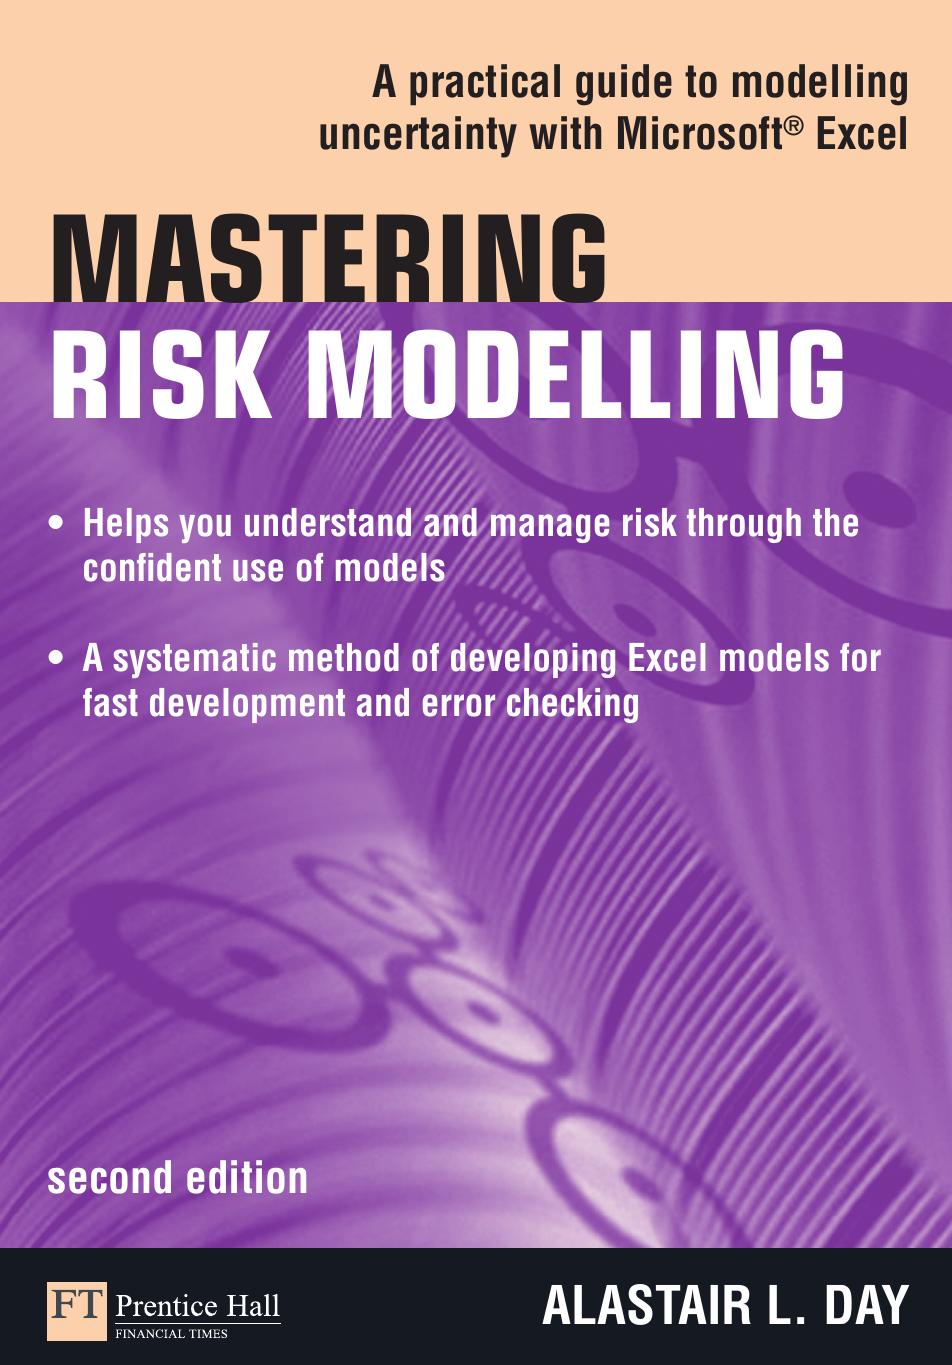 Mastering Risk Modelling: A Practical Guide to Modelling Uncertainty with Microsoft Excel